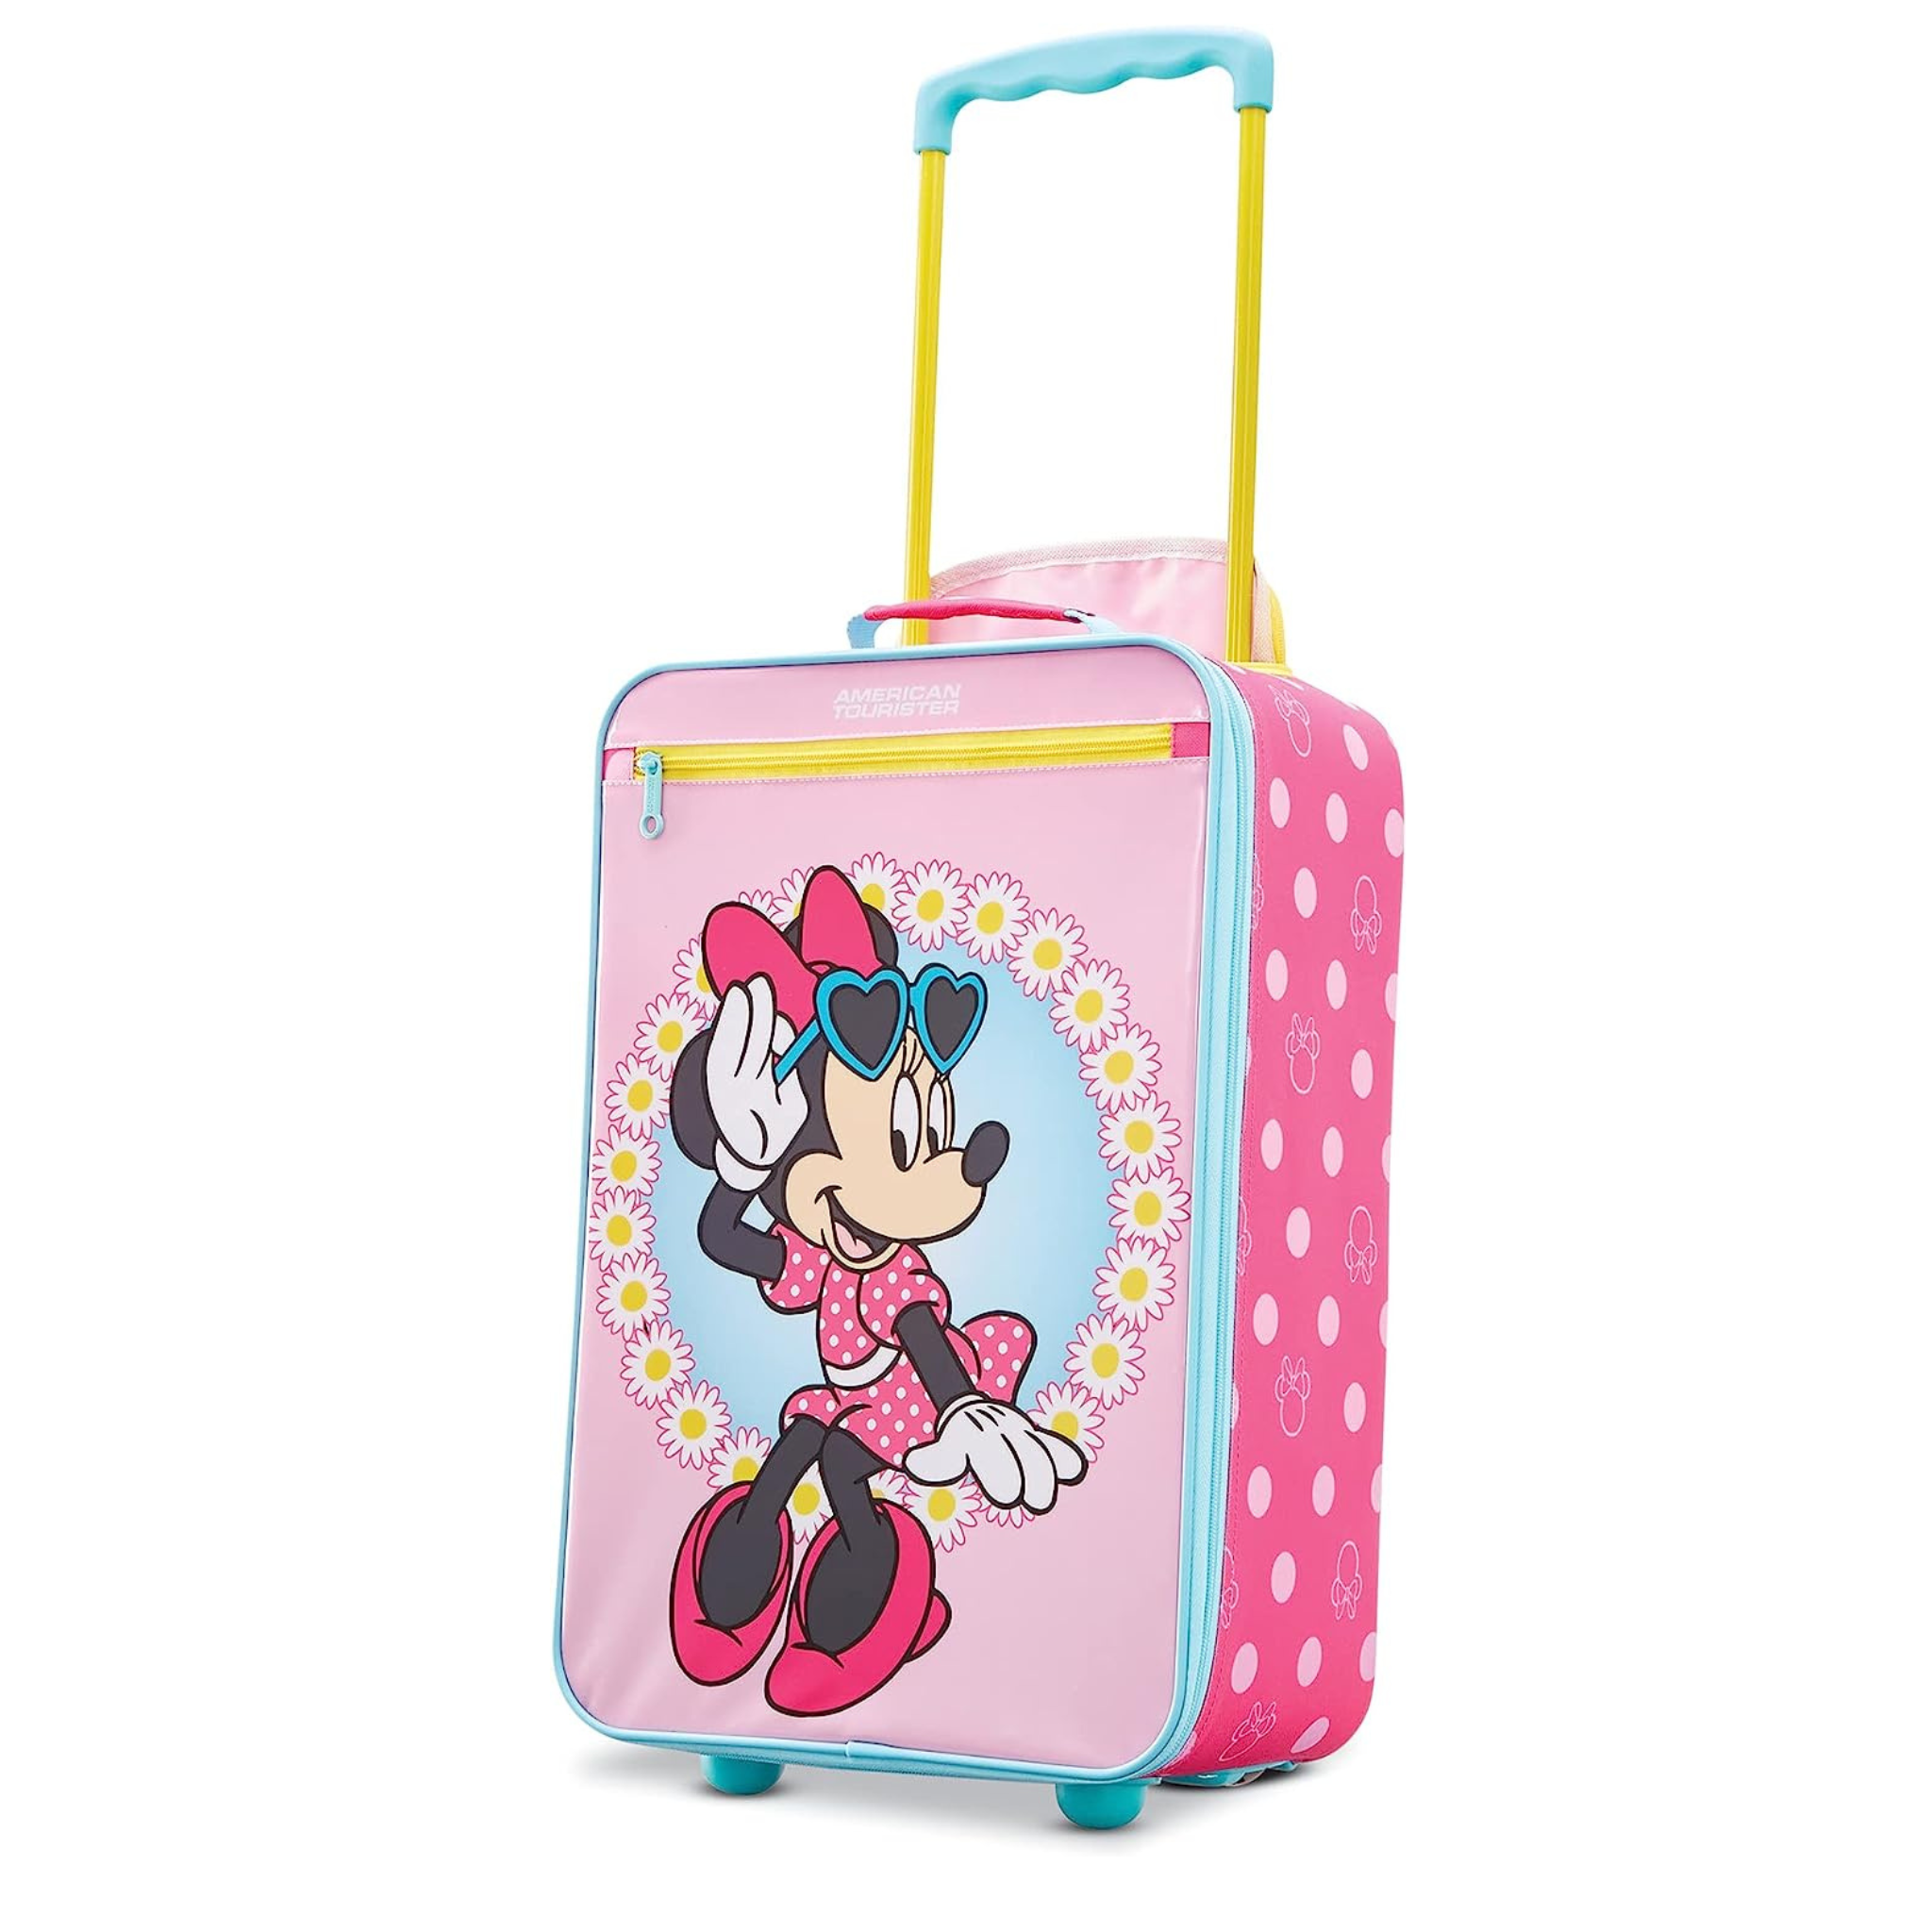 AMERICAN TOURISTER Kids' Disney Softside 18-Inch Carry-On Luggage, Minnie